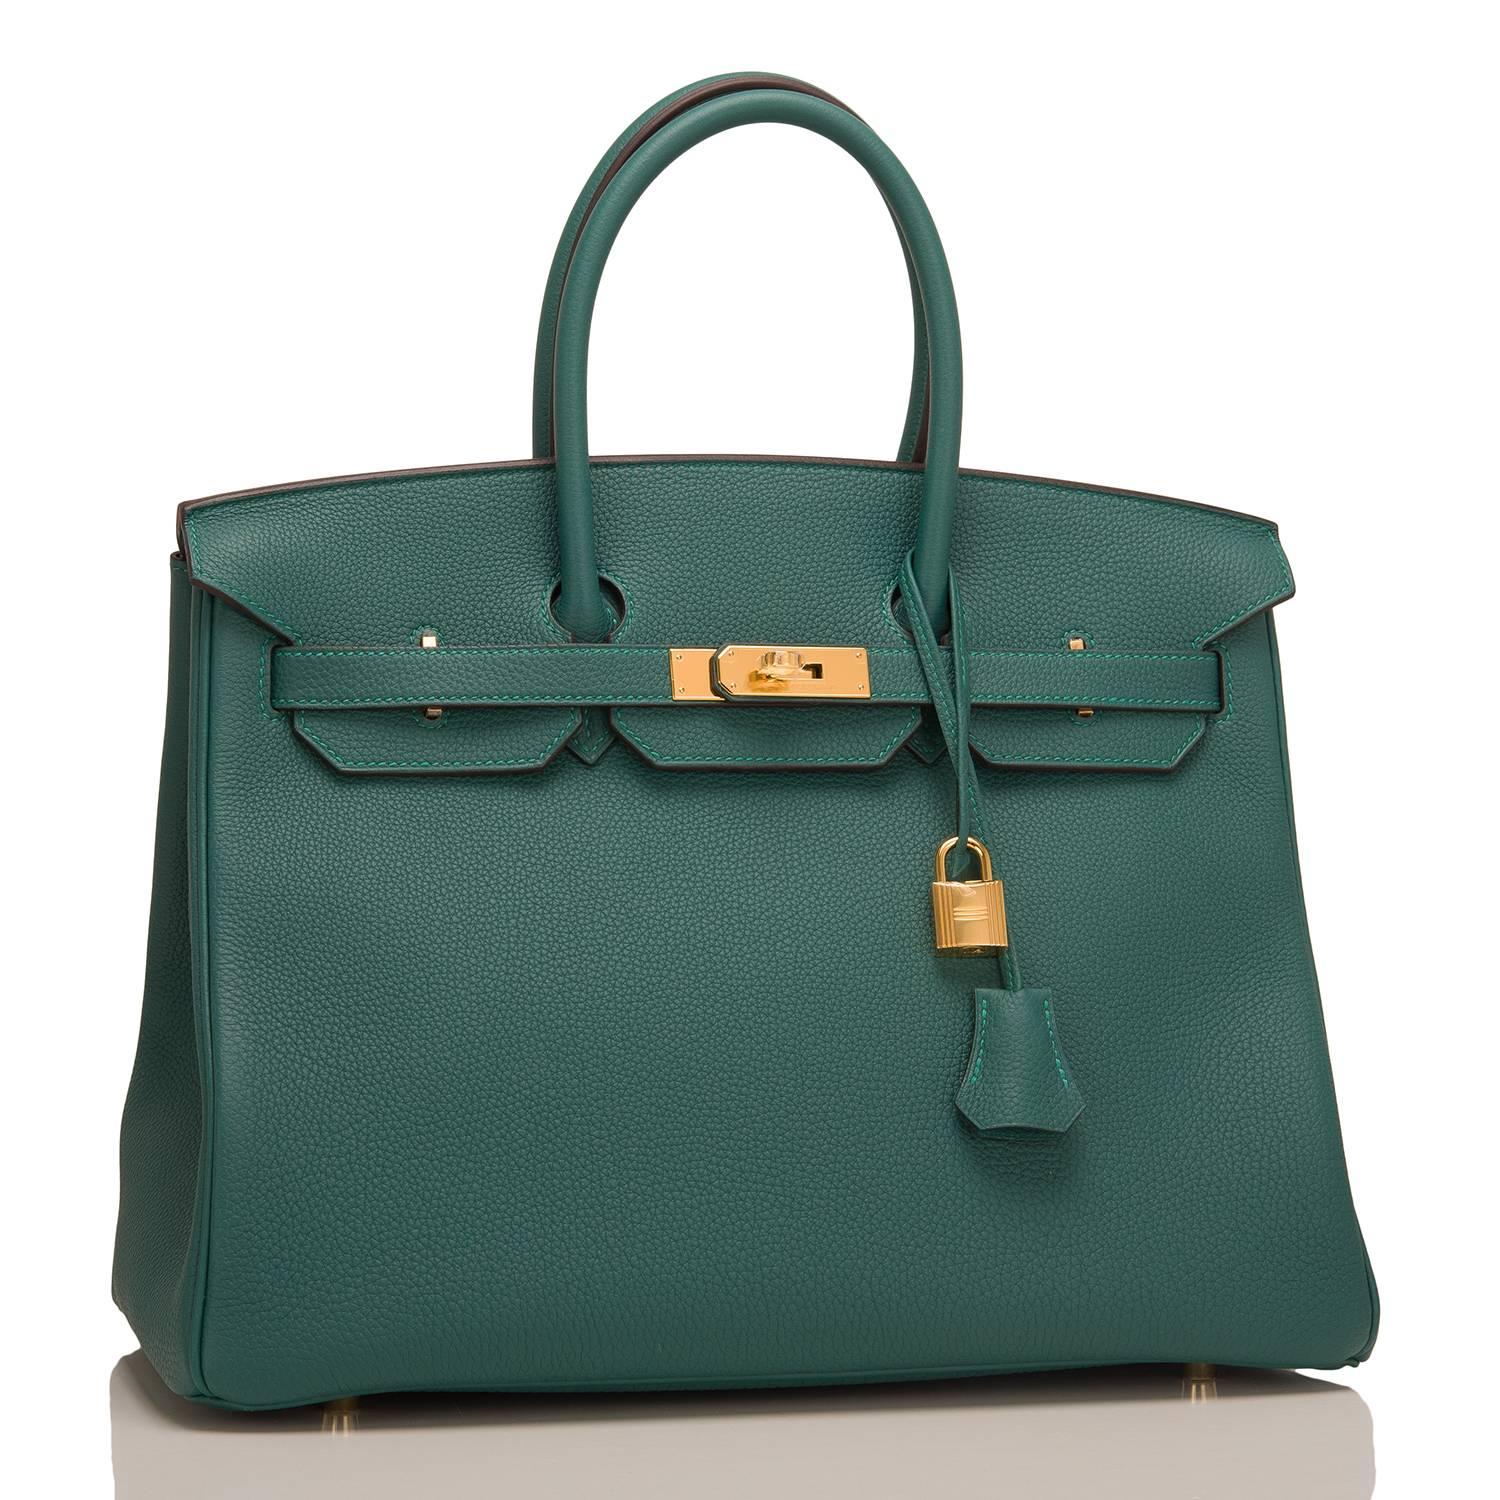 Hermes Malachite Birkin 35cm of togo leather with gold hardware.

This Birkin features tonal stitching, a front toggle closure, a clochette with lock and two keys, and double rolled handles.

The interior is lined with Malachite chevre and has a